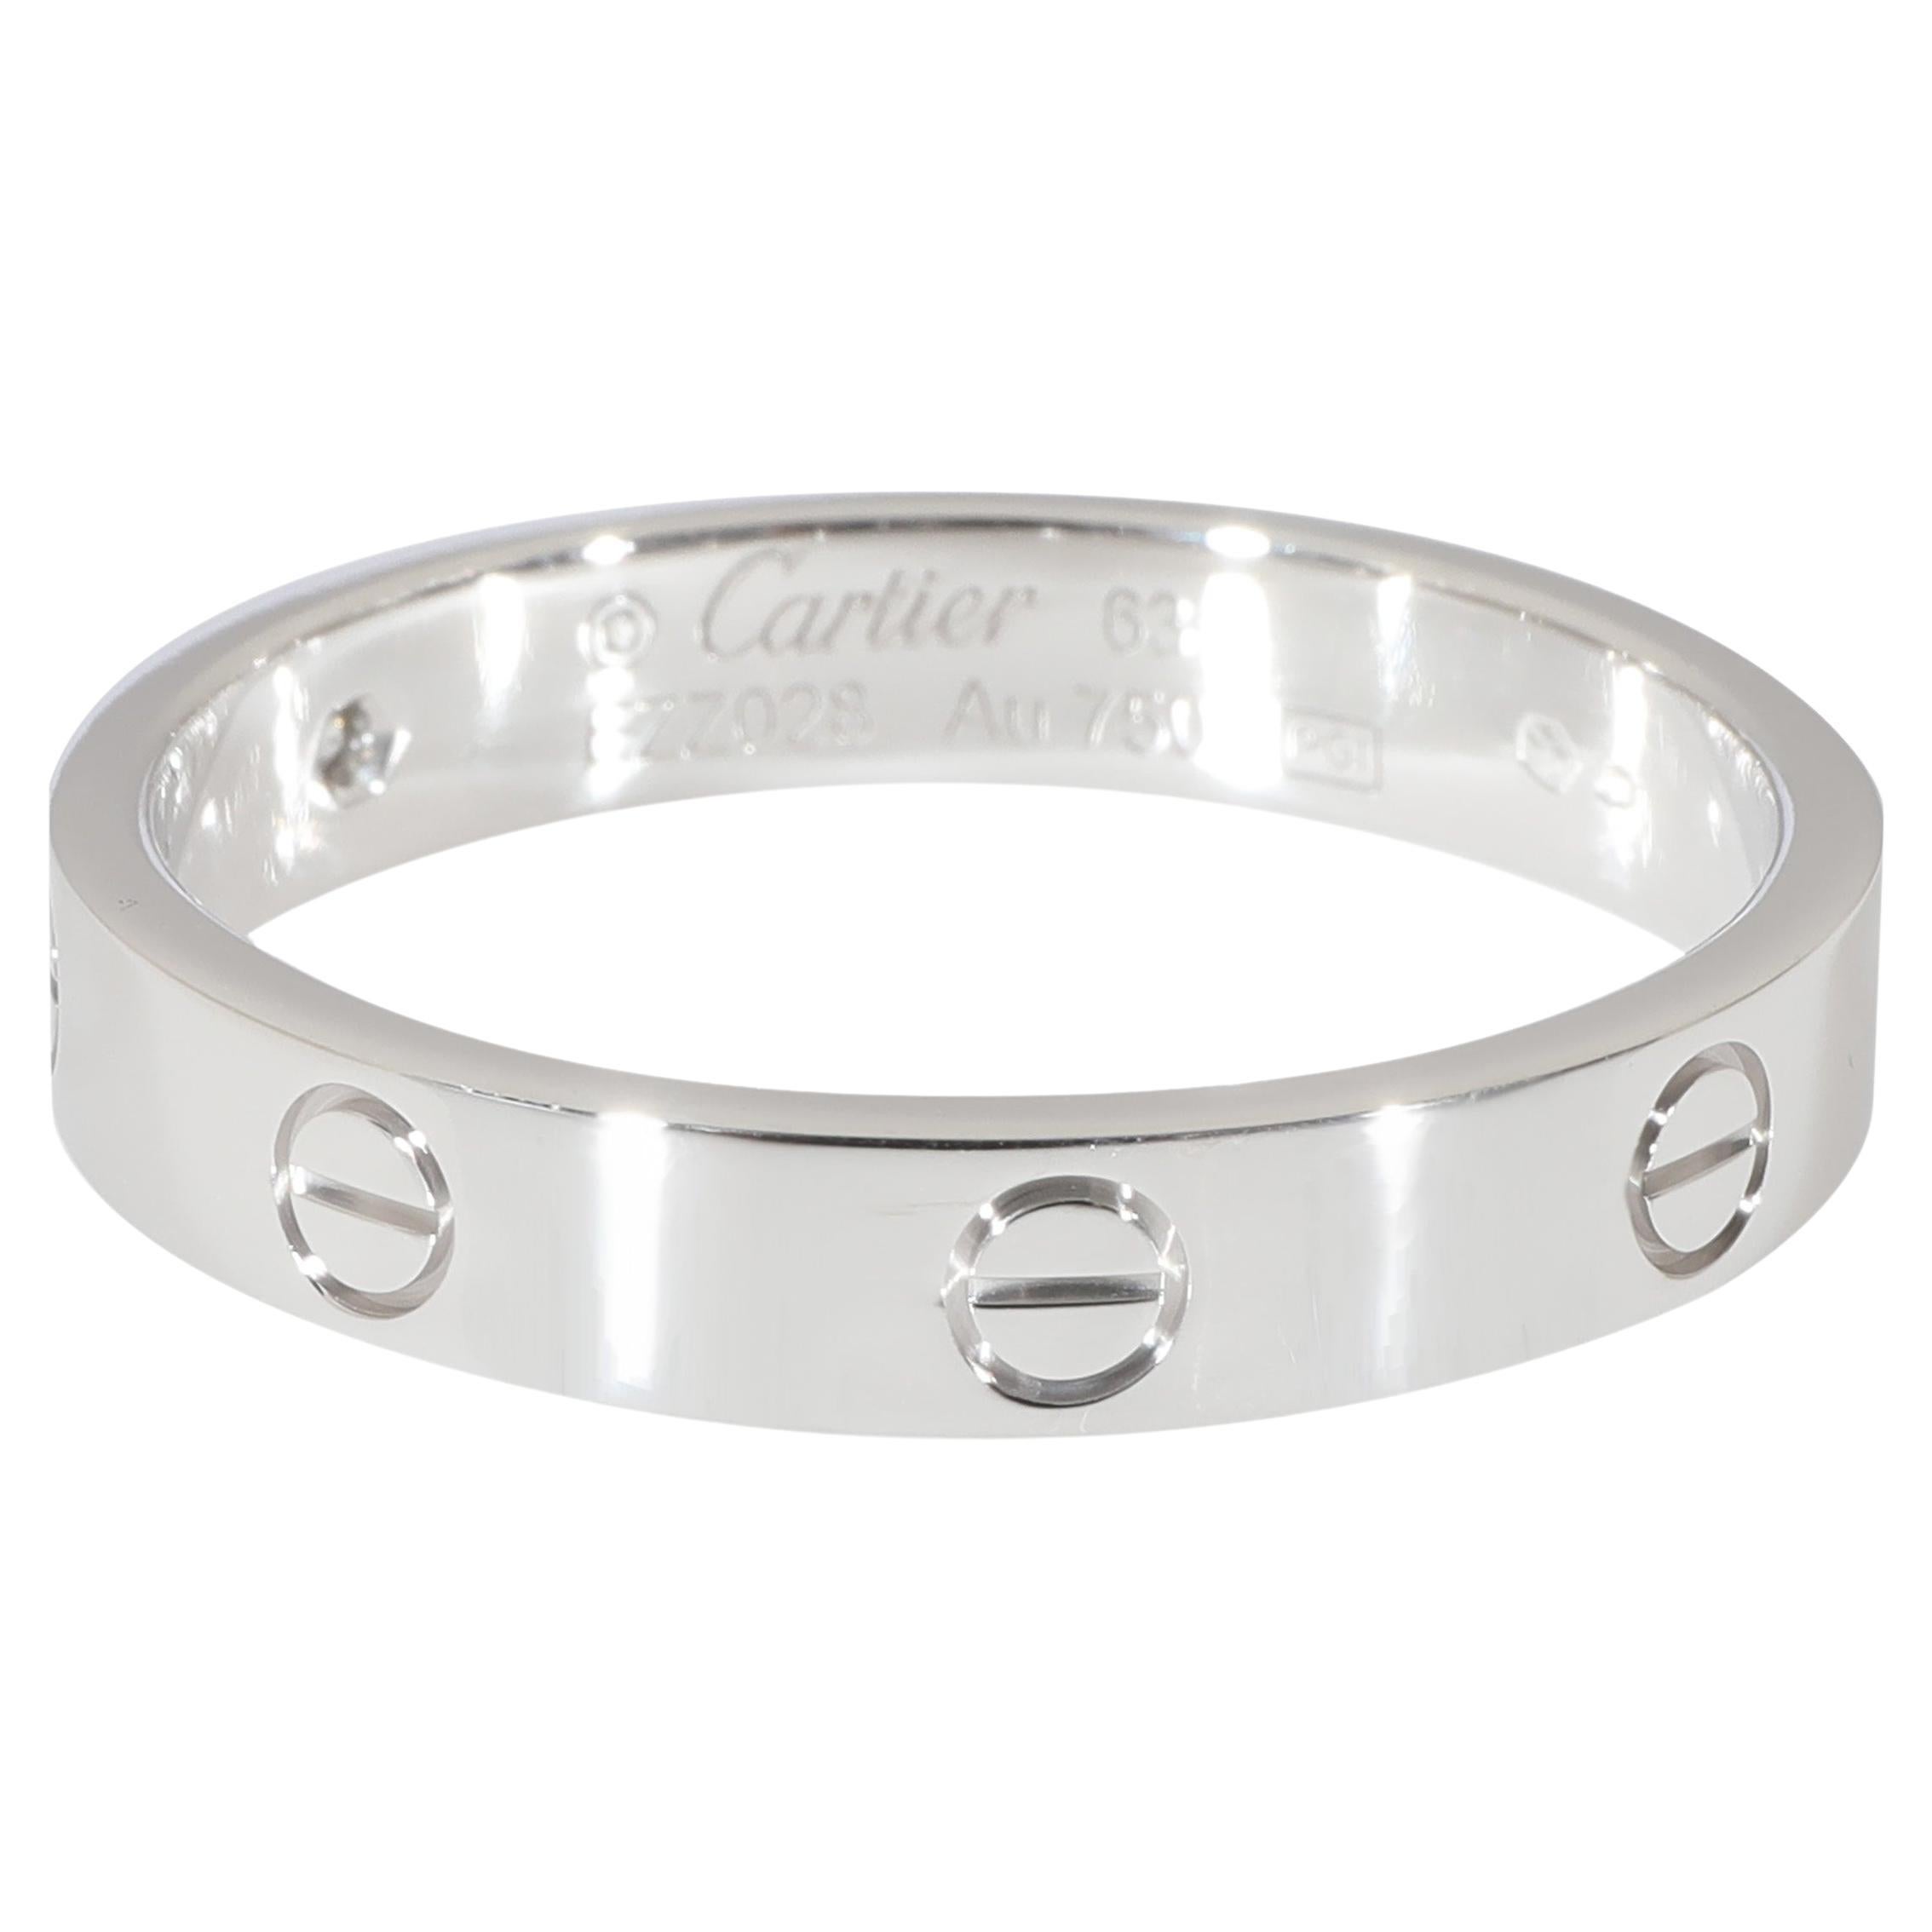 Cartier LOVE Diamond Wedding Band in 18k White Gold 0.02 CTW For Sale ...